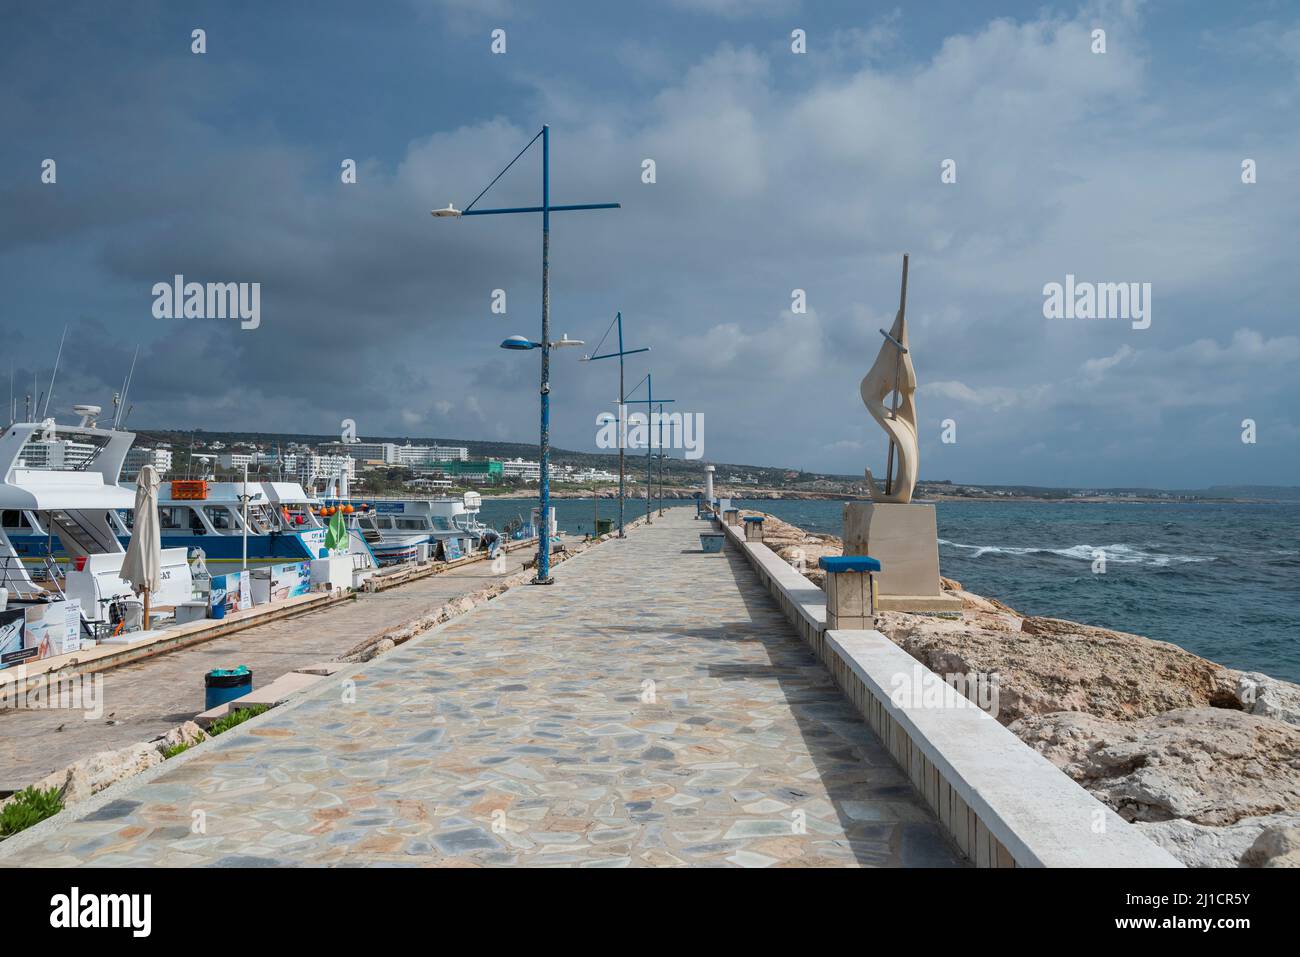 th august 2020 , Cyprus Ayia Napa , waterfront promenade overlooking the yacht Stock Photo